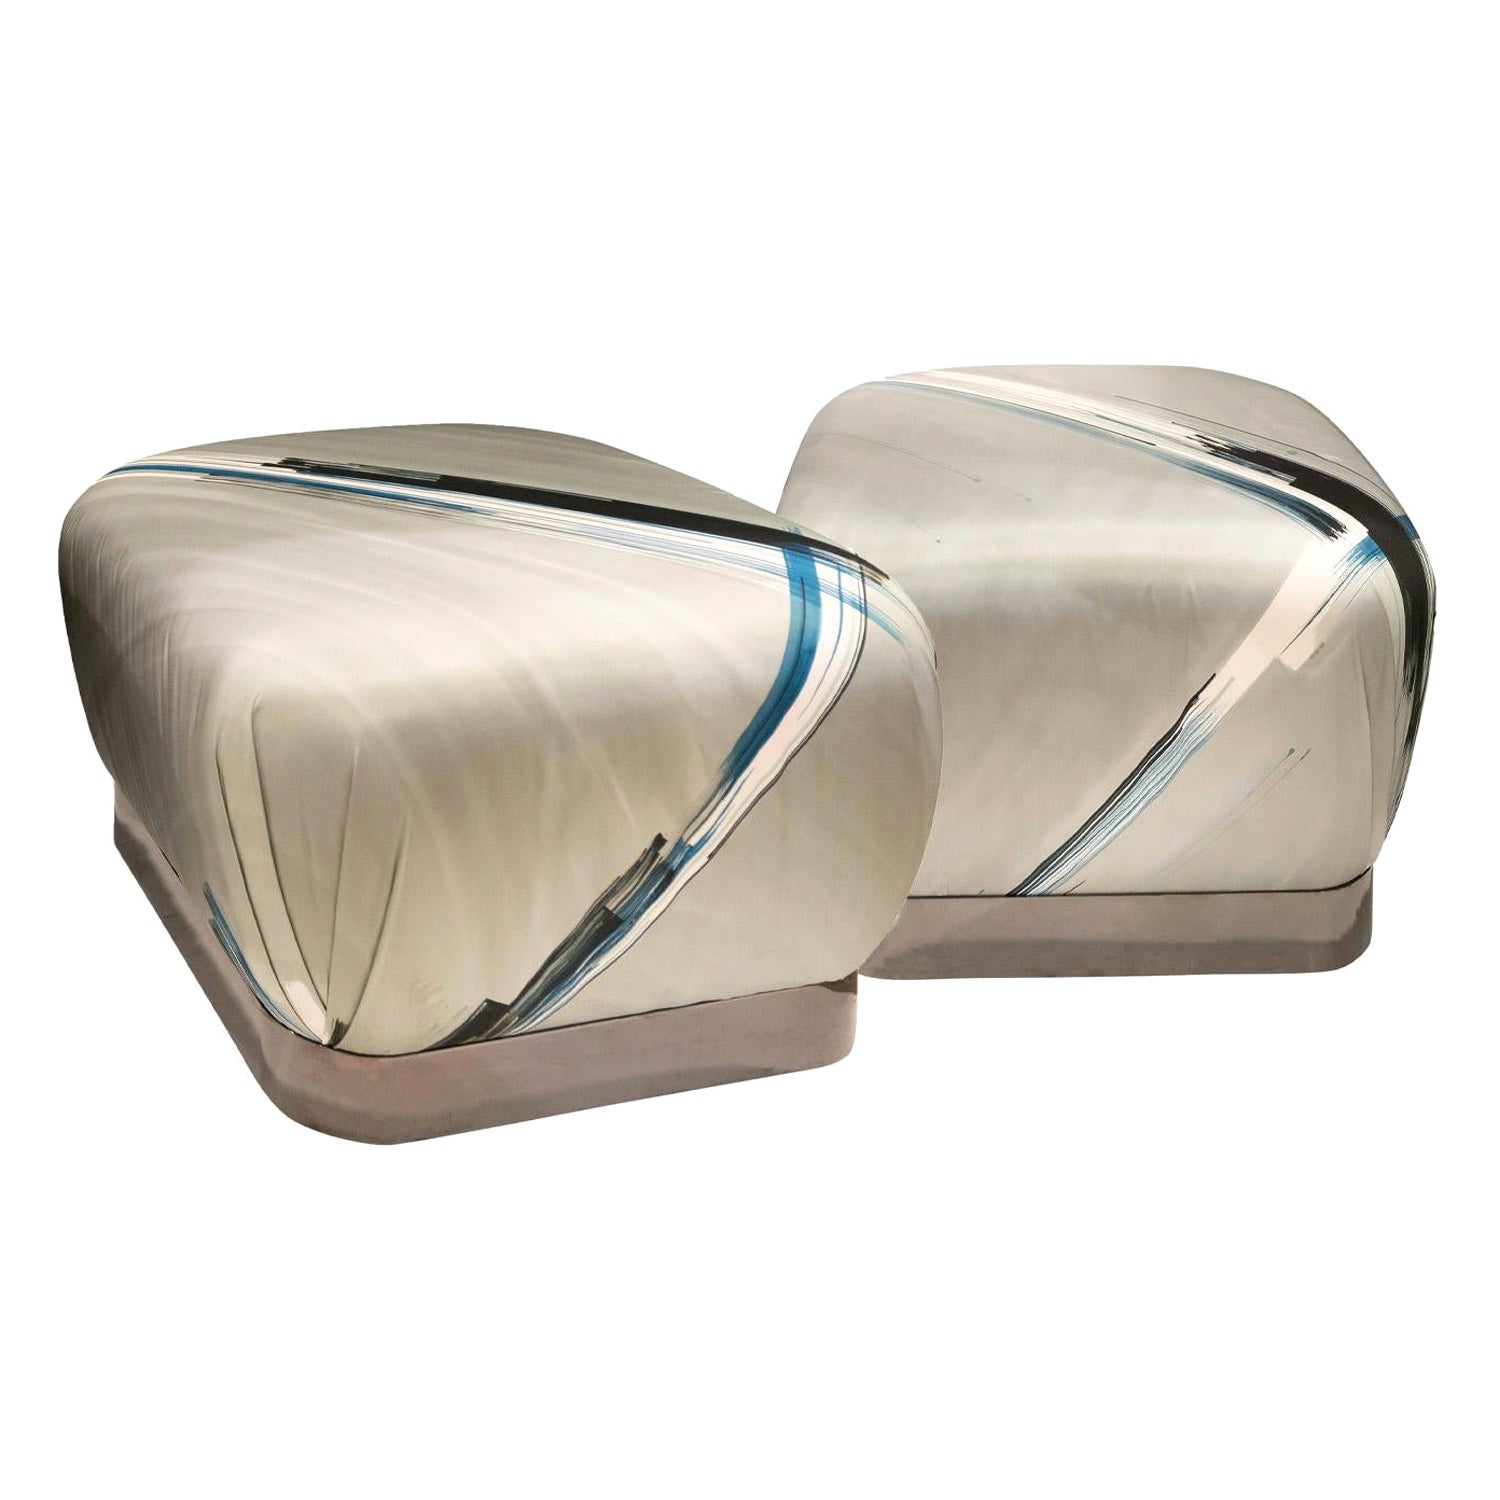 Karl Springer Pair of "Souffle Ottomans" with Polished Gunmetal Bases, 1970s